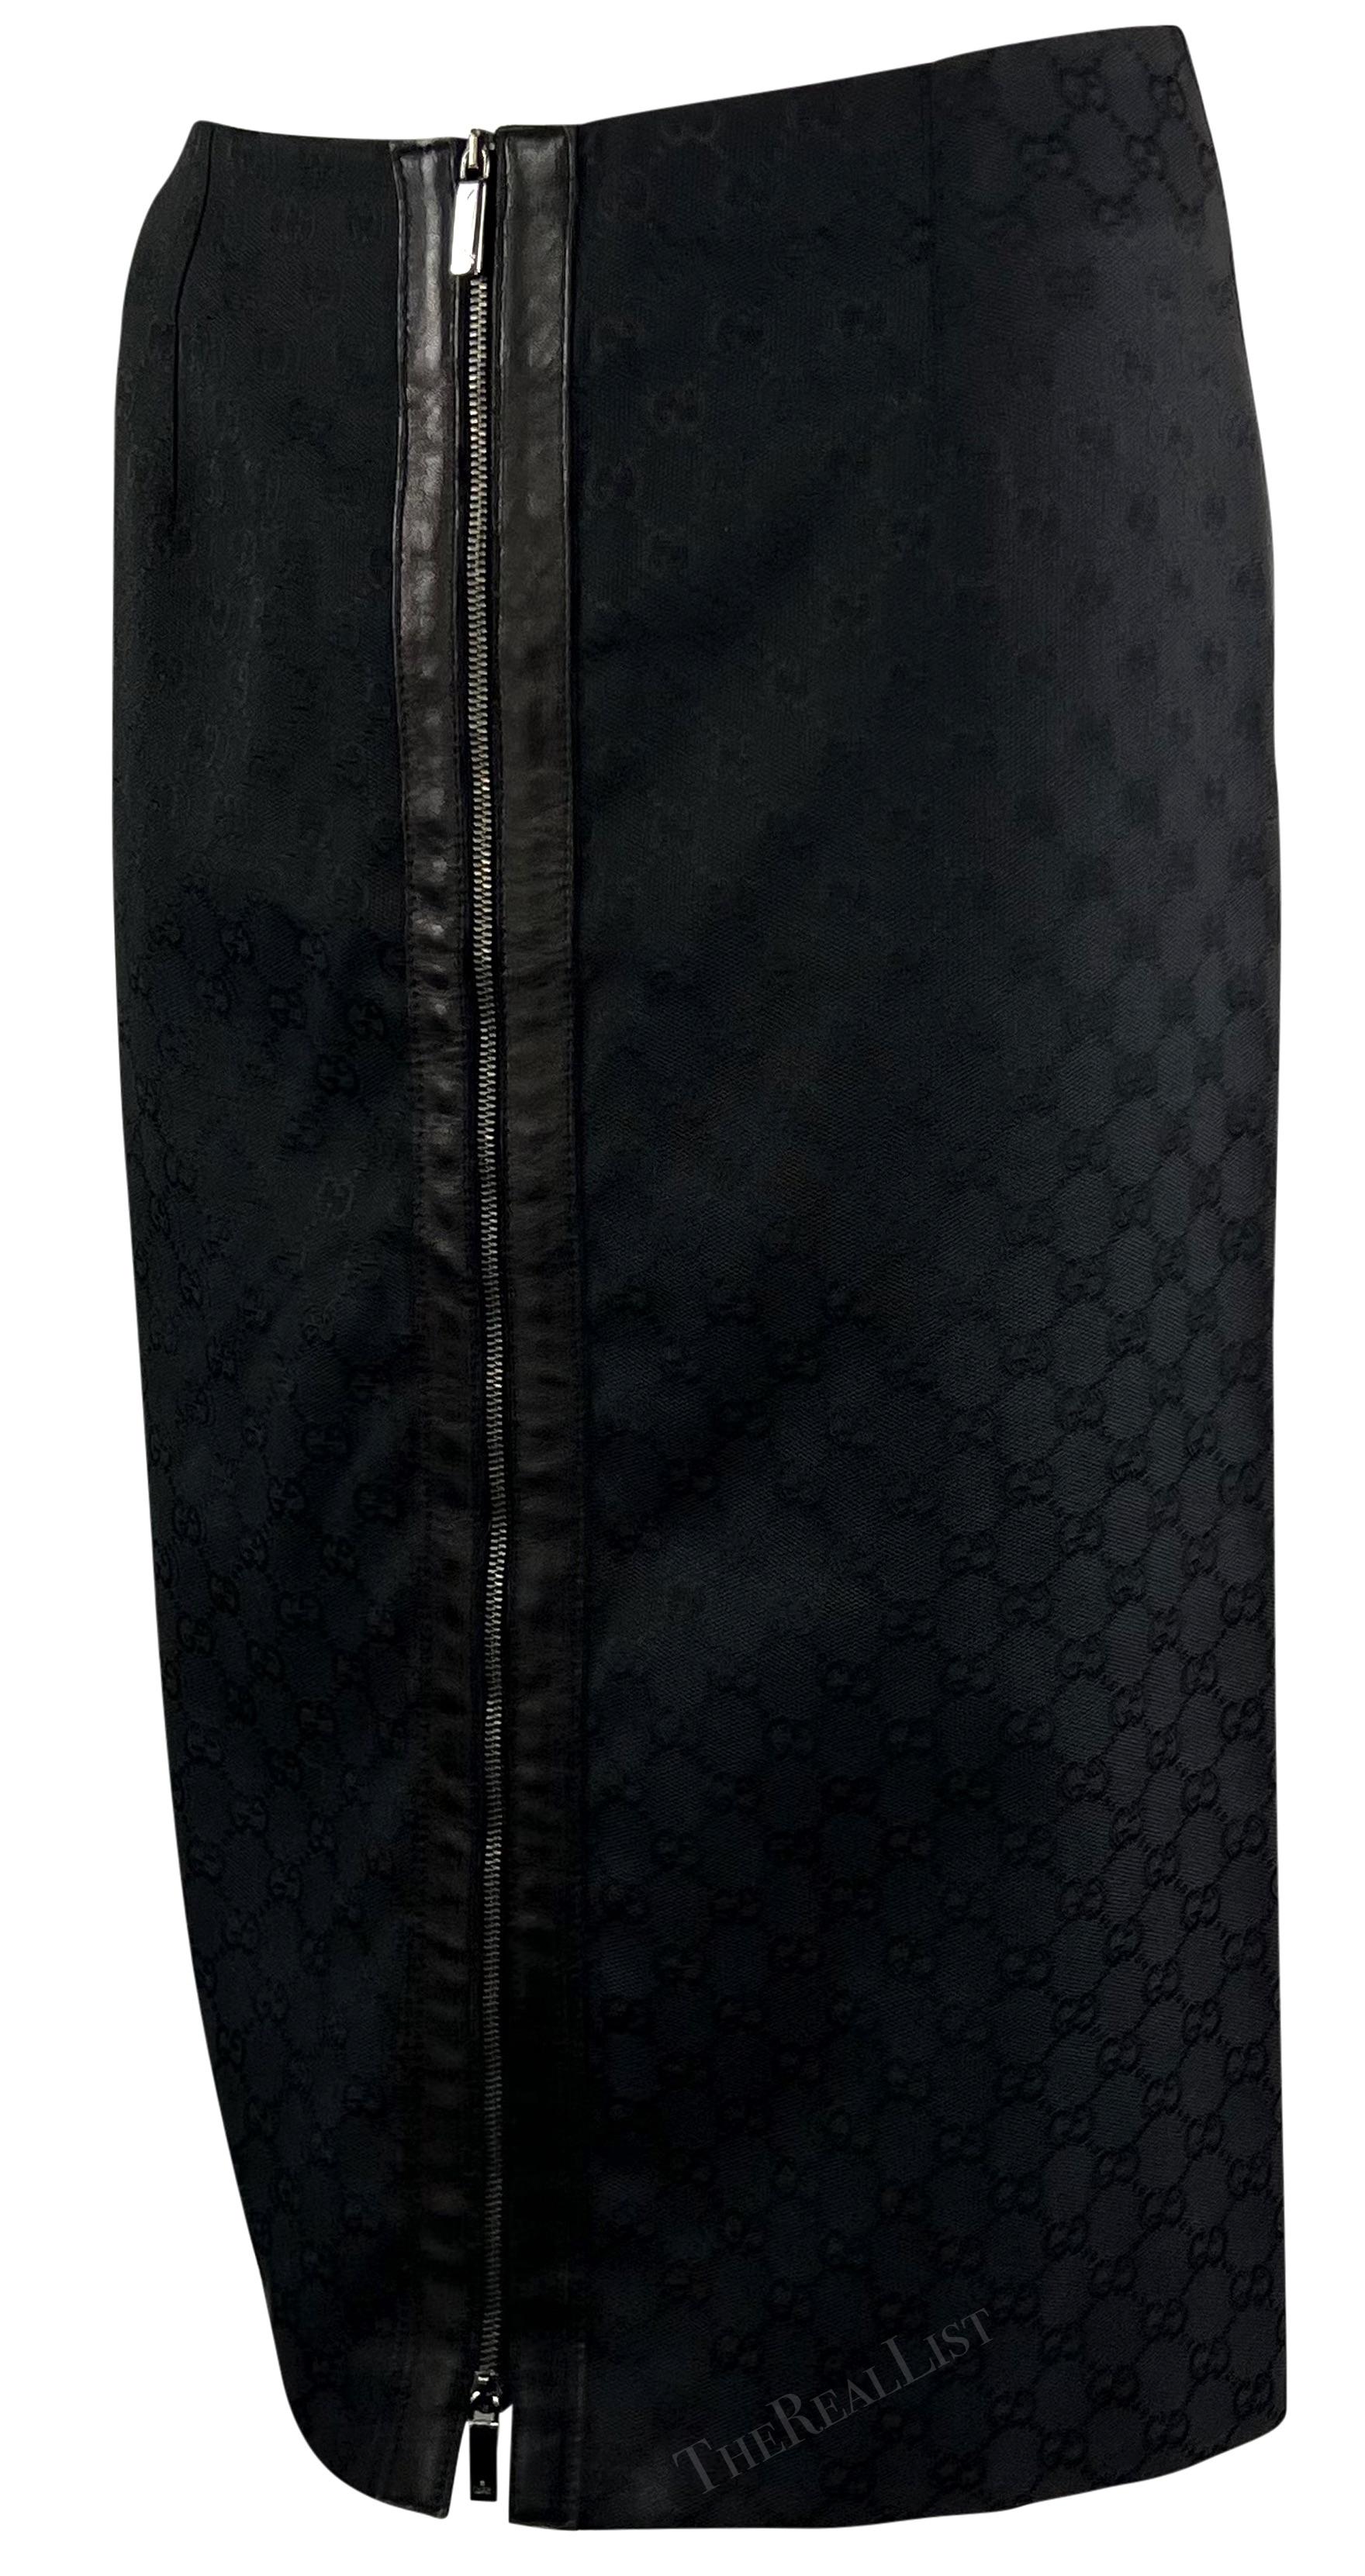 F/W 2000 Gucci by Tom Ford Black GG Monogram Zipper Pencil Skirt In Excellent Condition For Sale In West Hollywood, CA